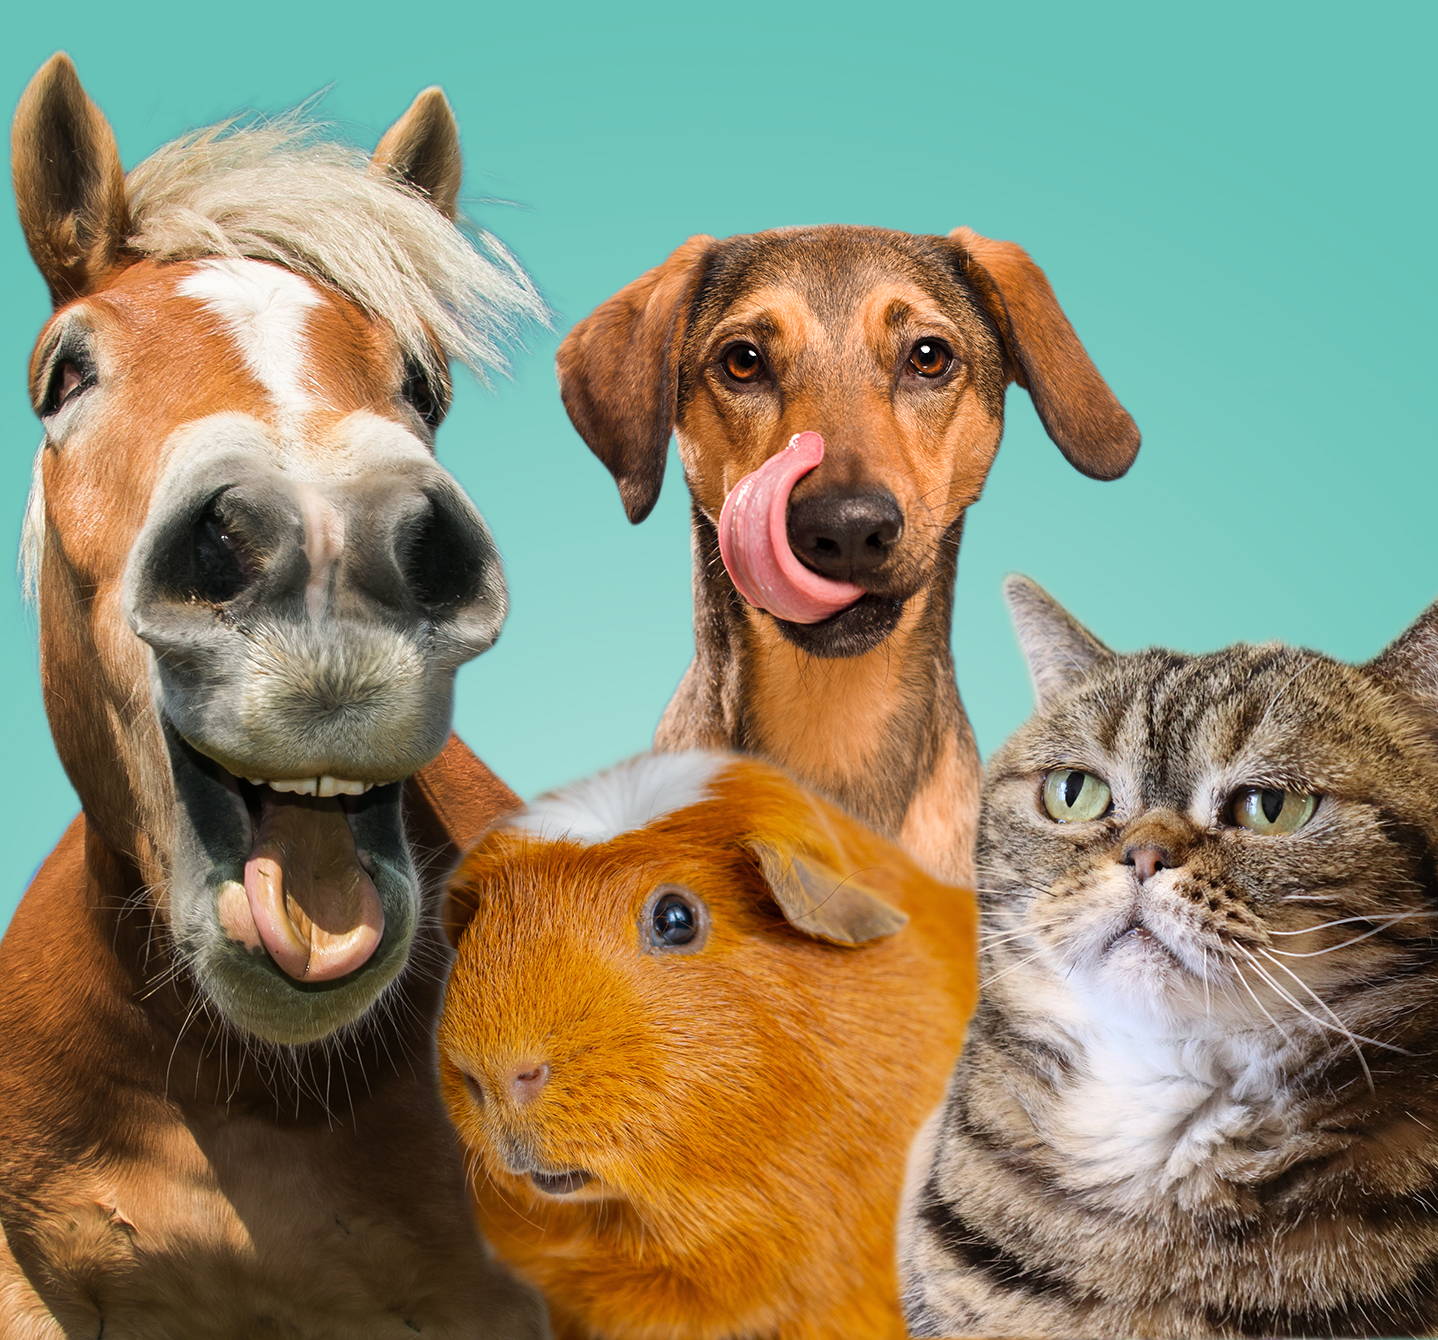 What is animal allergy? This dog licking its lips, grumpy cat, guinea pig and neighing horse can all cause allergic reactions